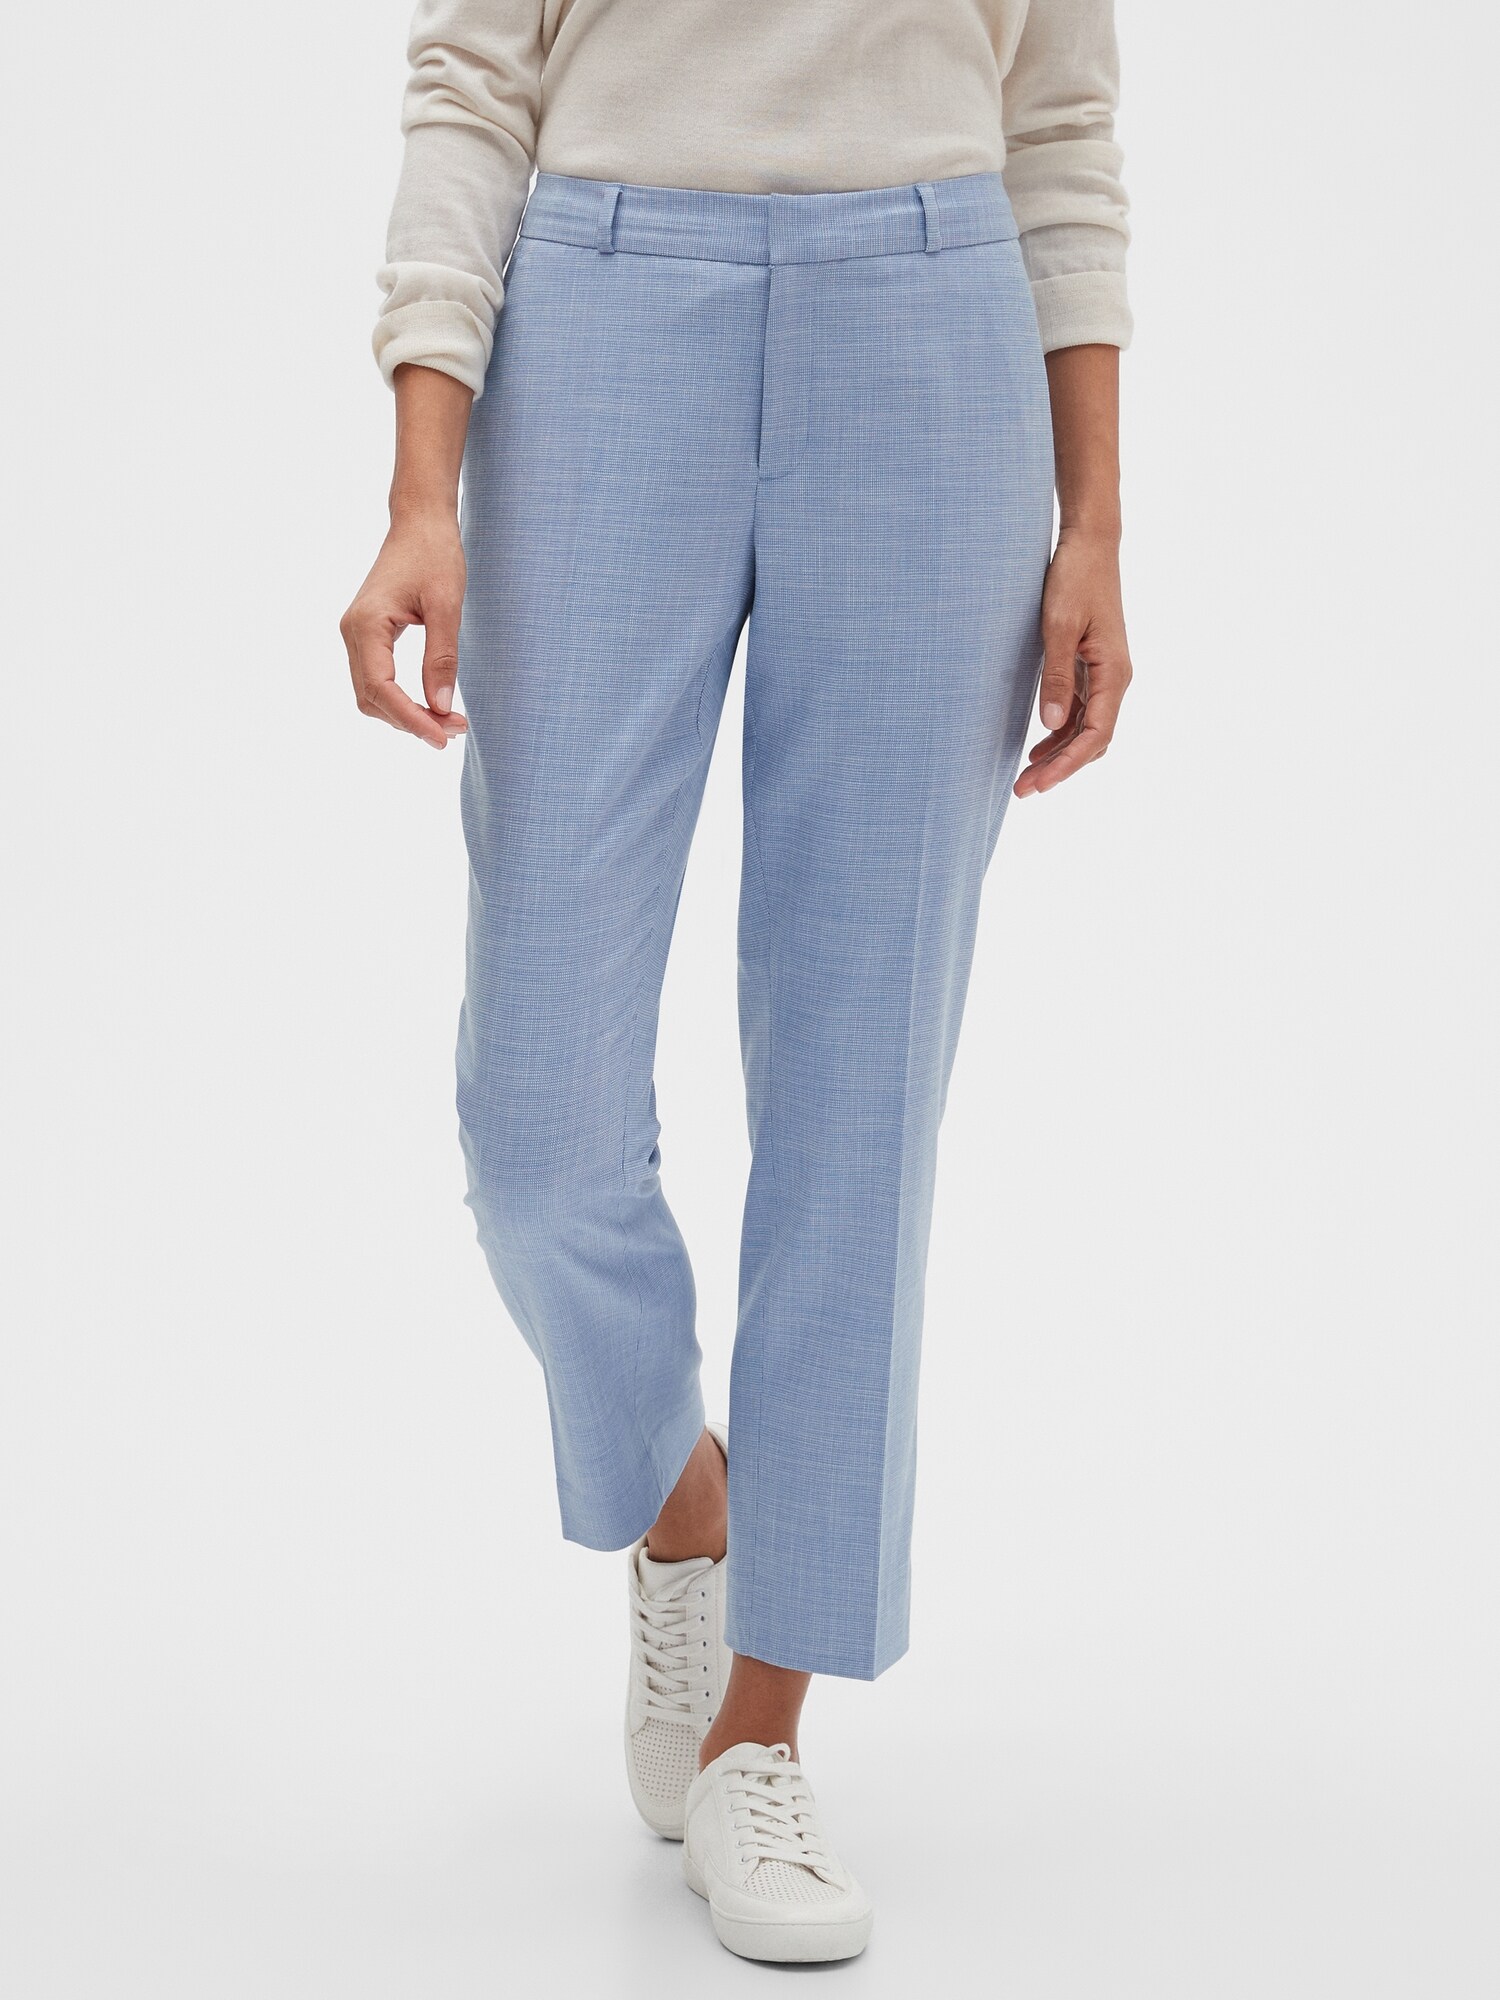 Avery Chambray Tailored Ankle Pant